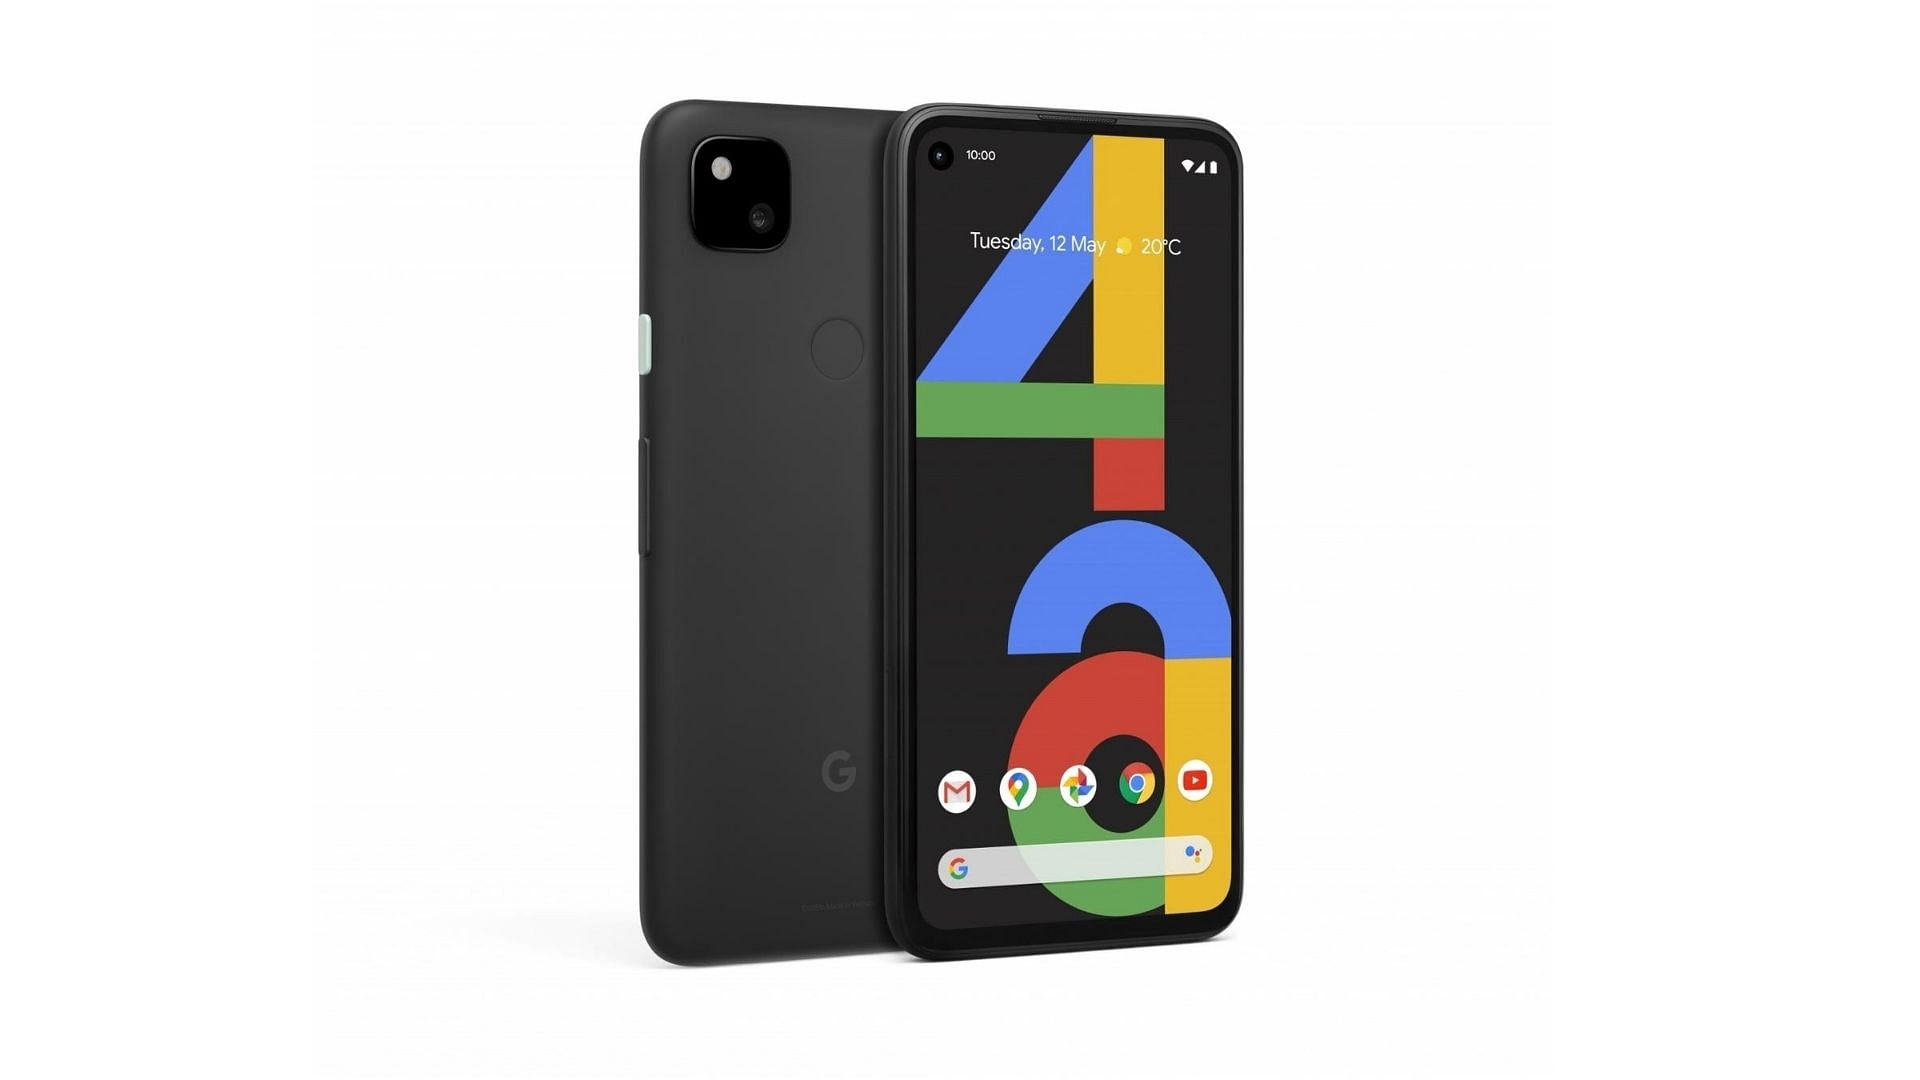 Google on Monday, 3 August introduced the new affordable smartphone Pixel 4a starting at $349 for the lone 6GB+128GB model in the US that will arrive in India in October.